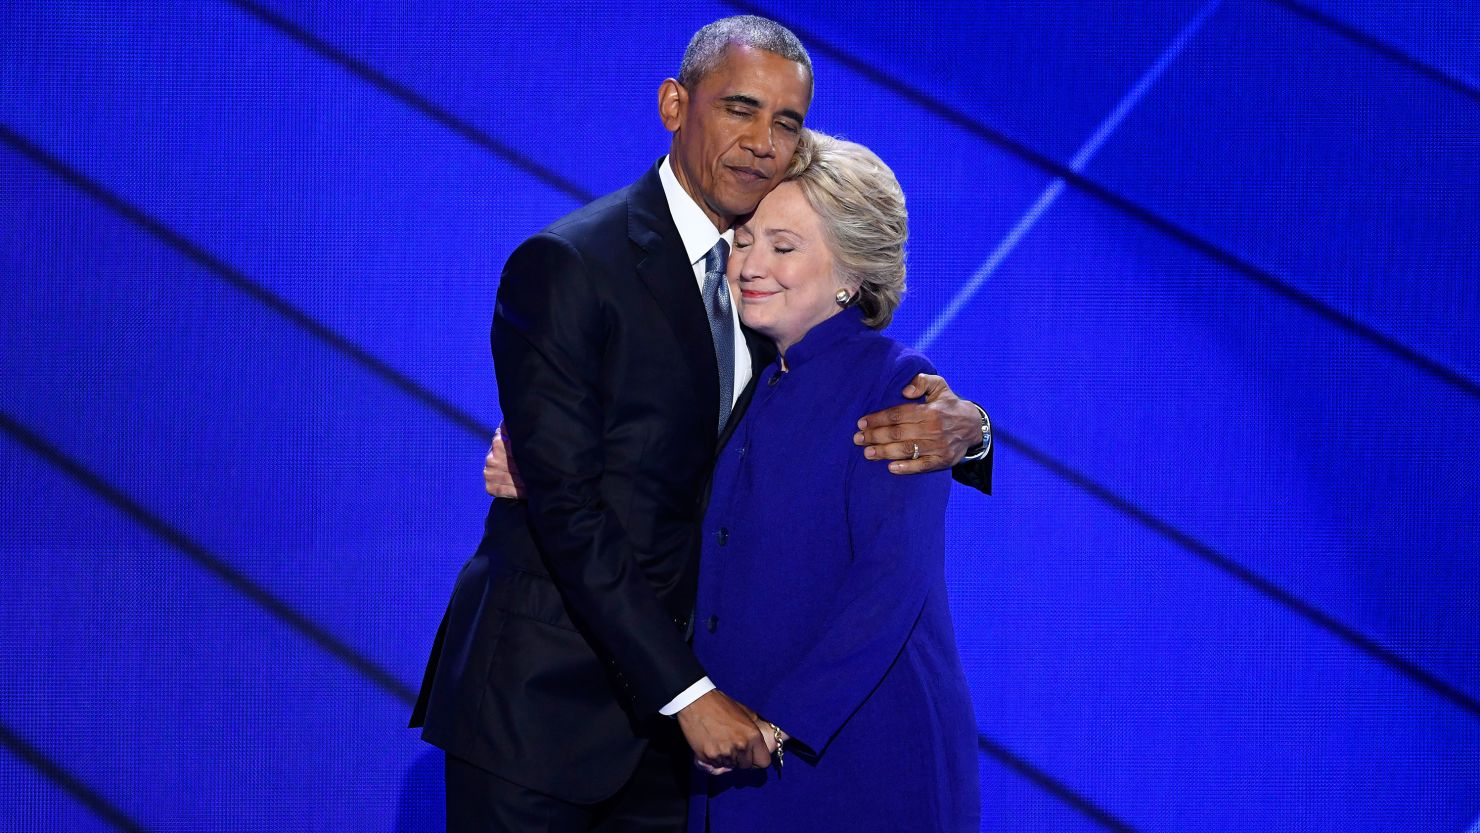 In a symbol of American optimism and activism, President Barack Obama embraces Hillary Clinton at the Democratic National Convention.